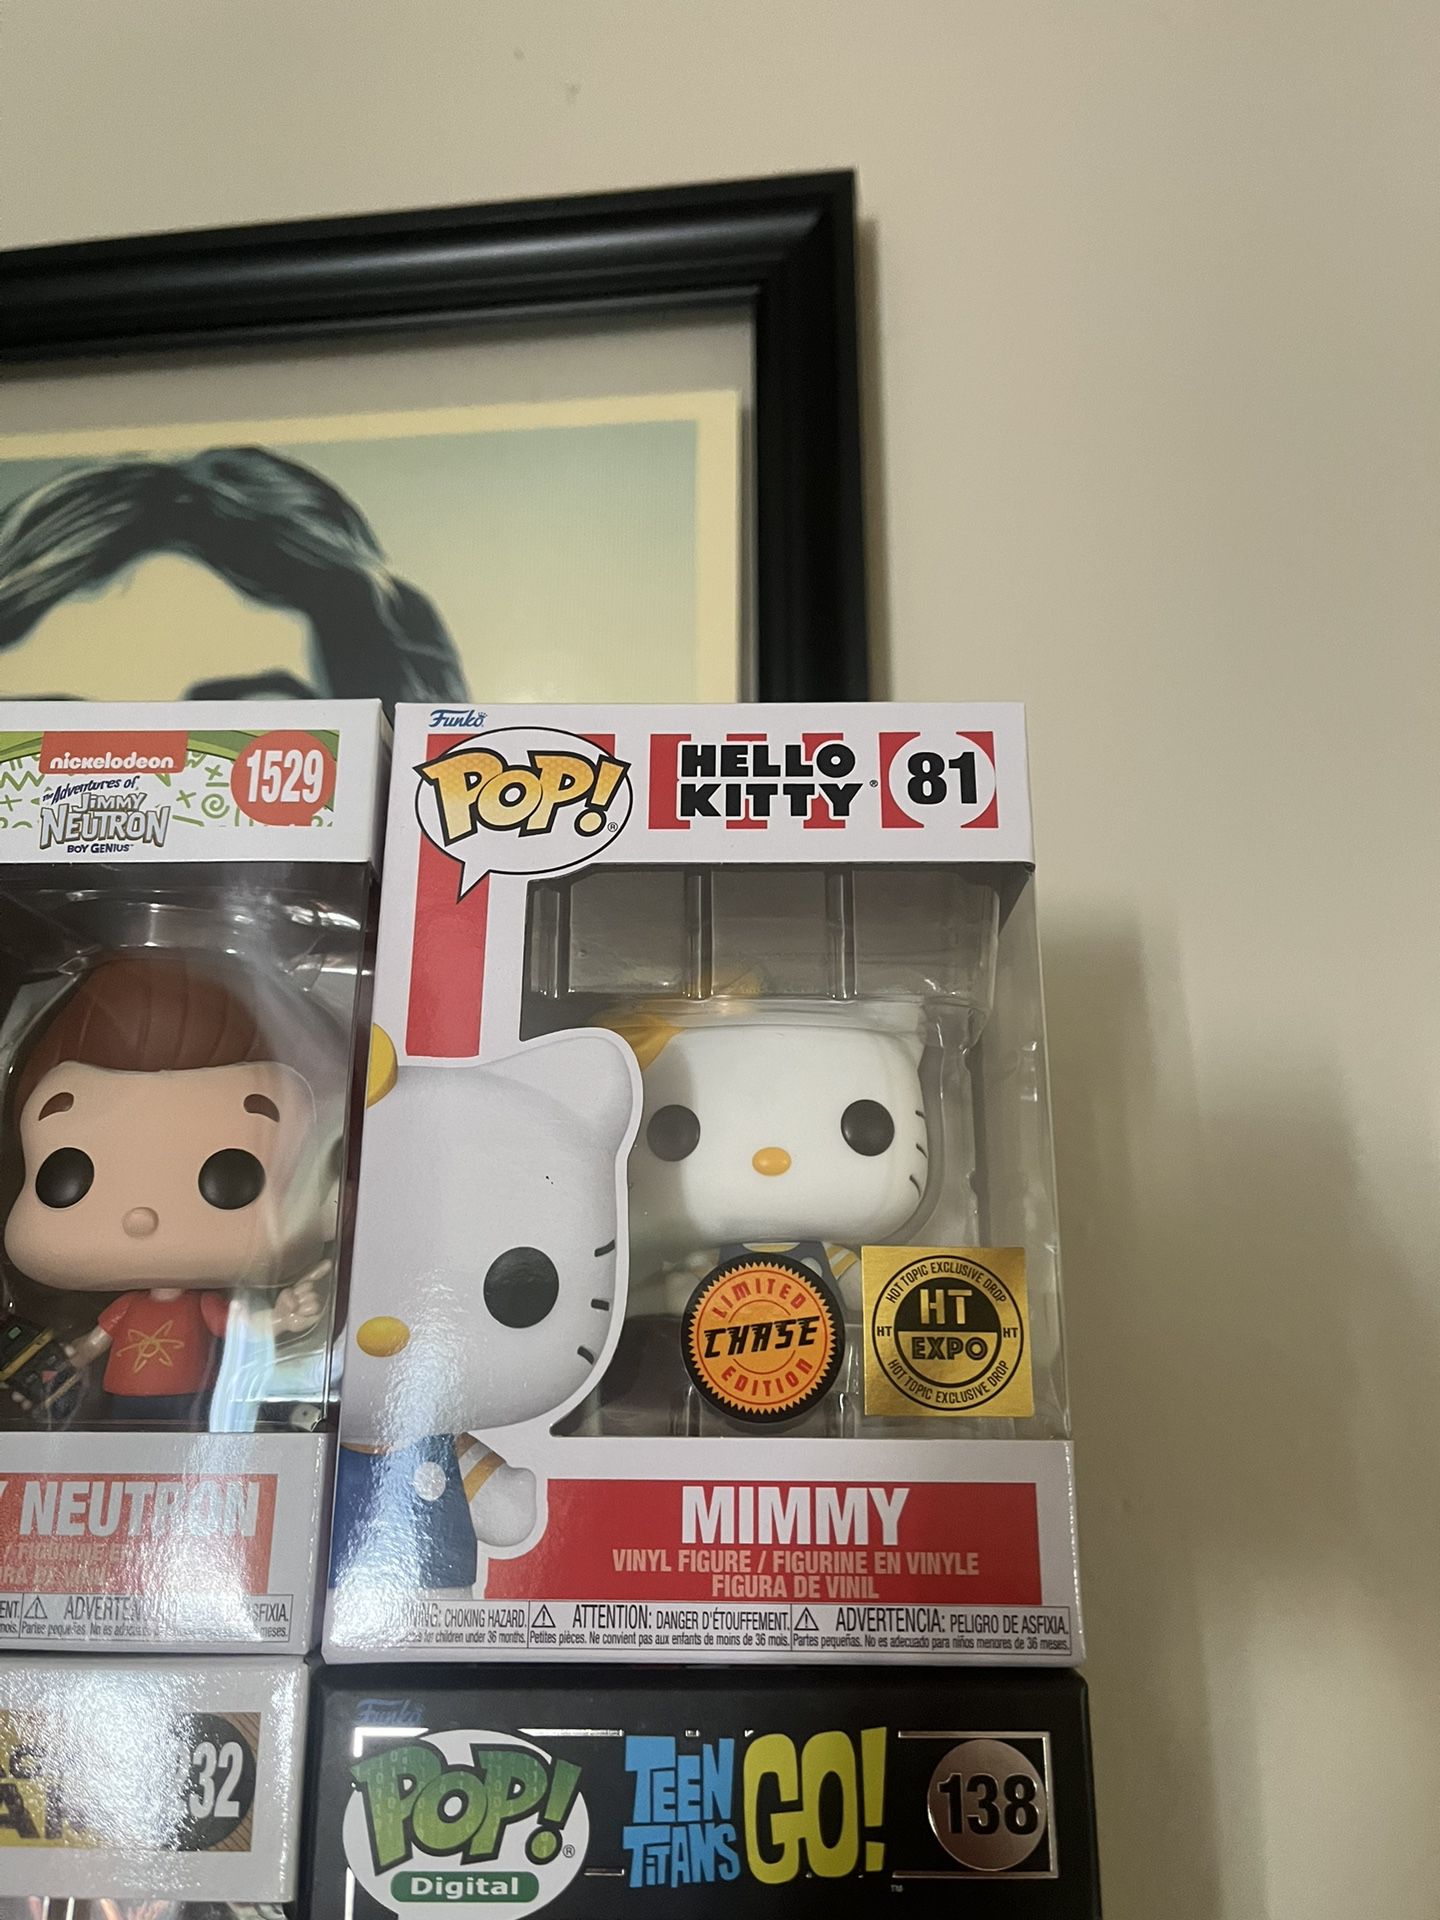 Mimmy Funko Chase Hot Topic